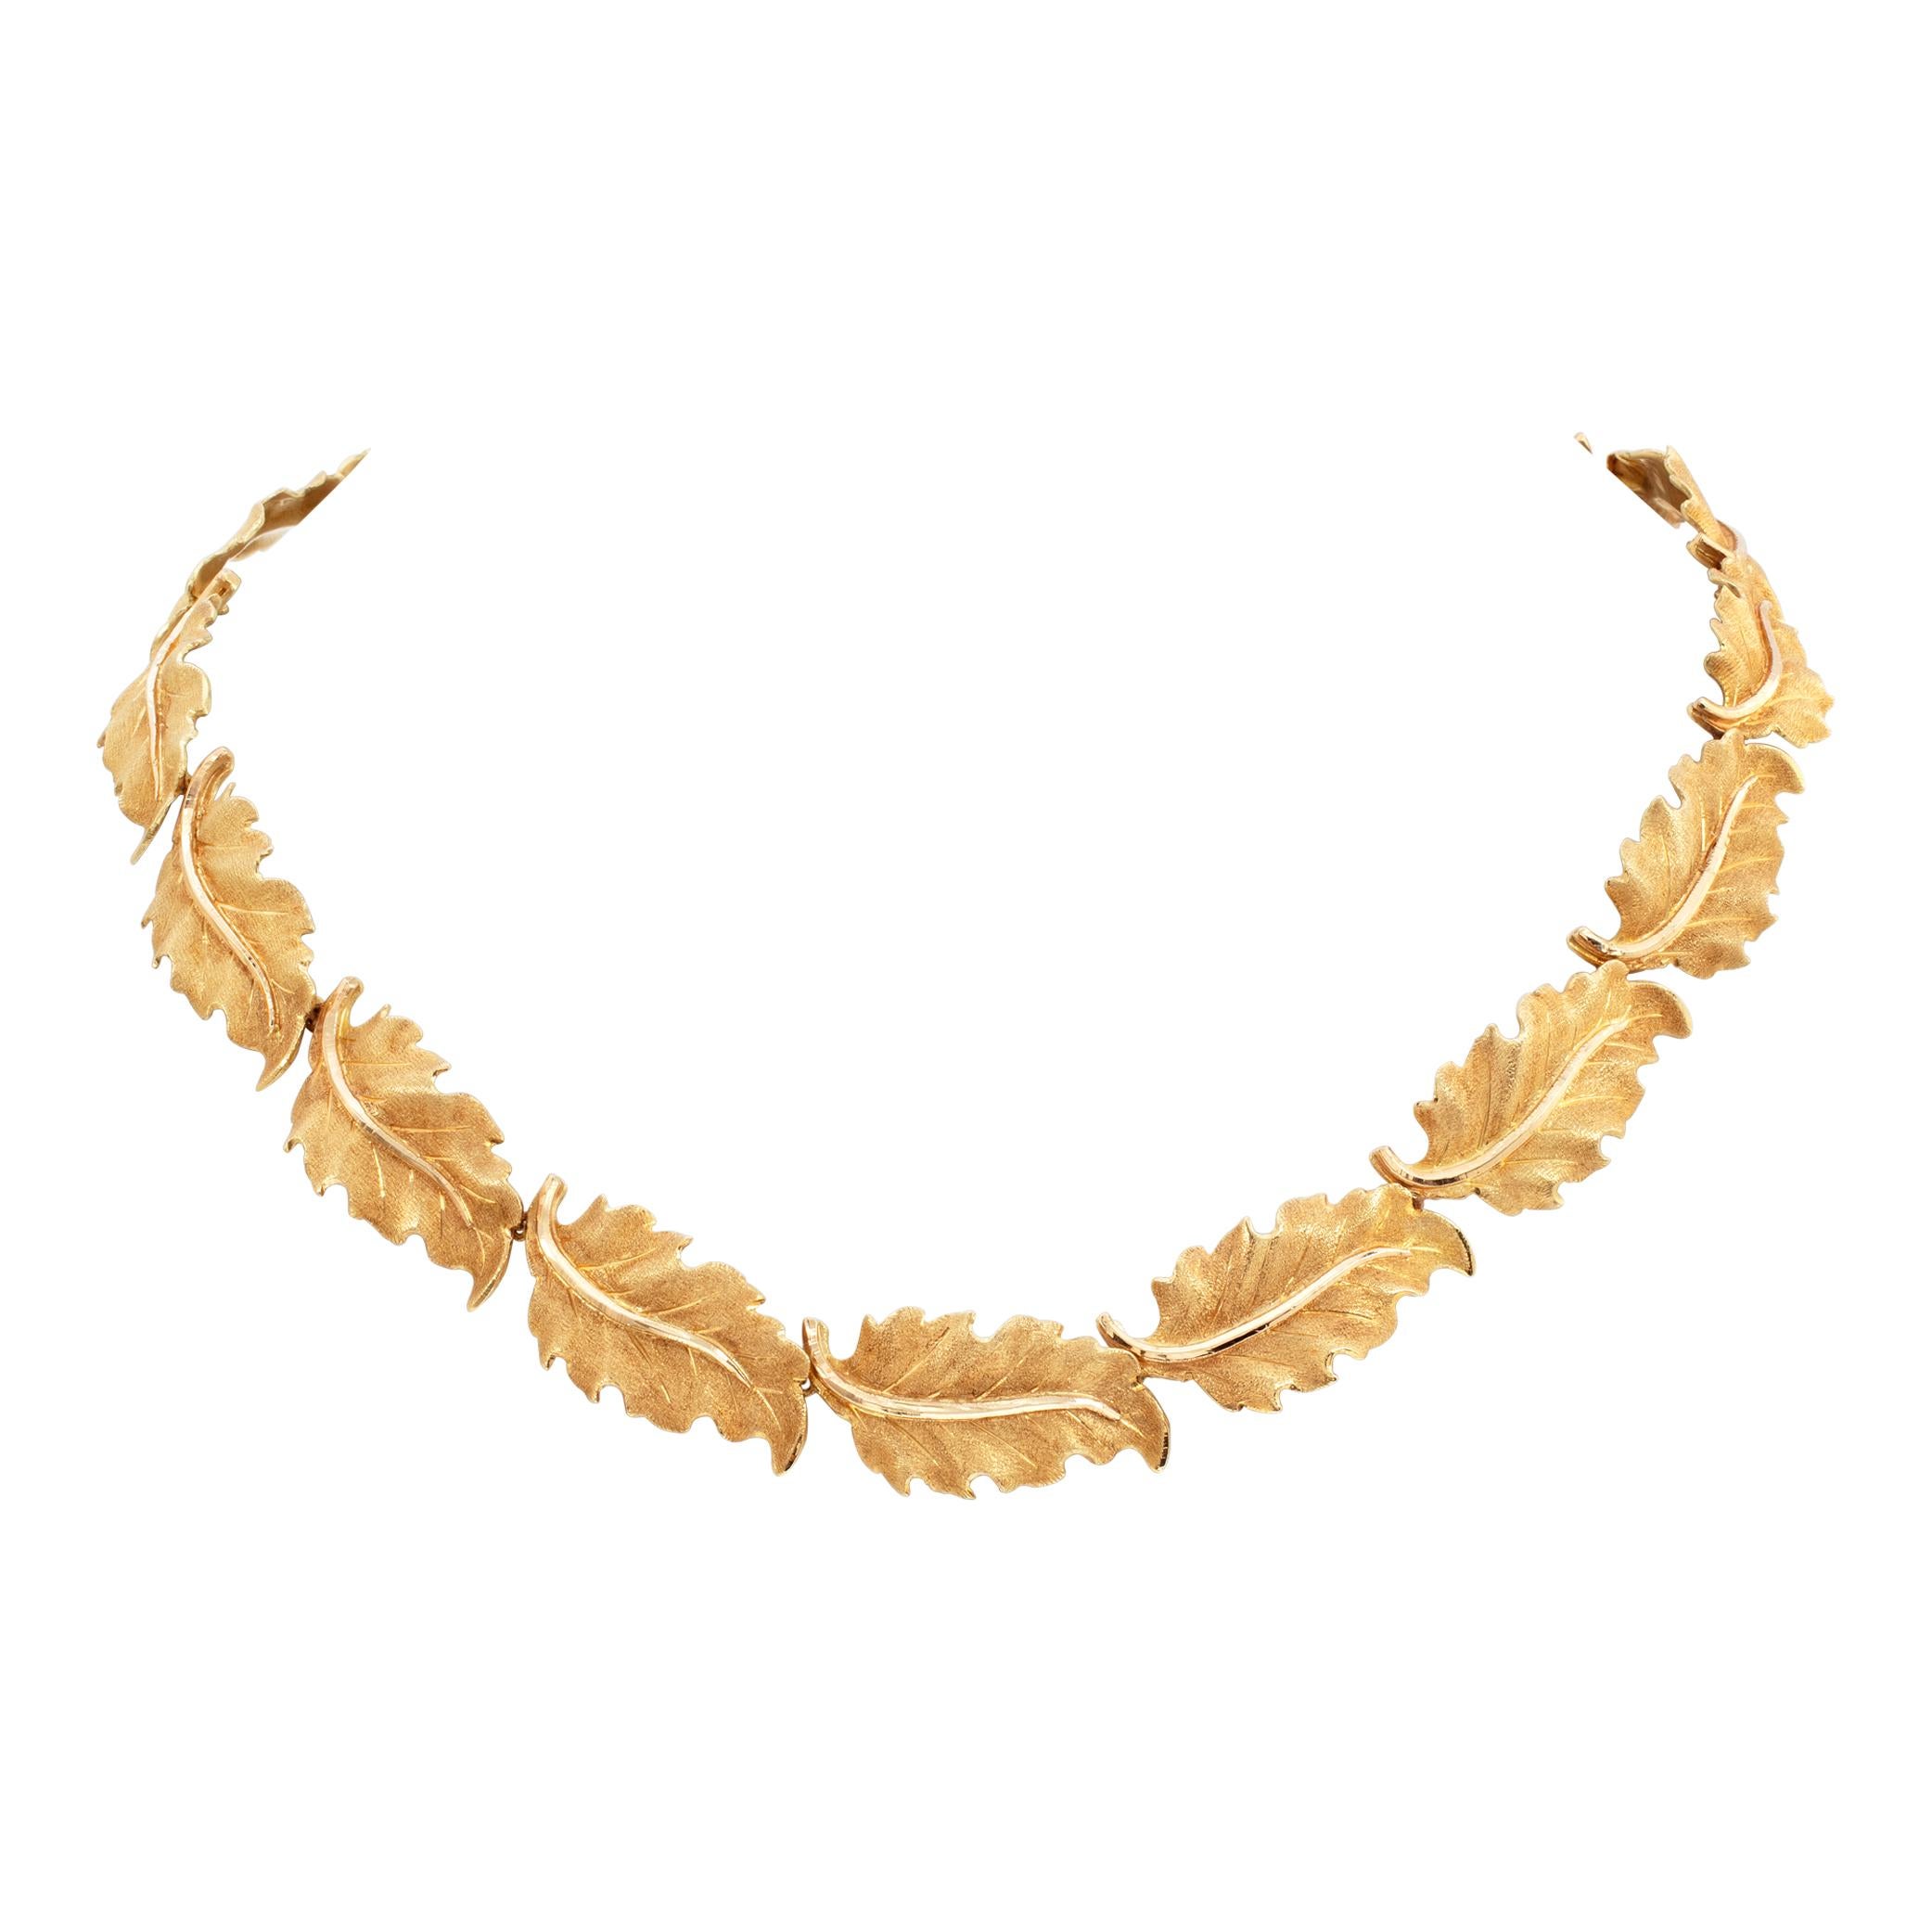 Italian designer M.Bucellatti  5 pieces complete parure Leaf set (necklace, earrings, cuff and ring) in 18k yellow gold. Pieces are signed M.Buccellati. Organic leaf motif, accented with the characteristic Buccellati's incised and chiseled patterns.